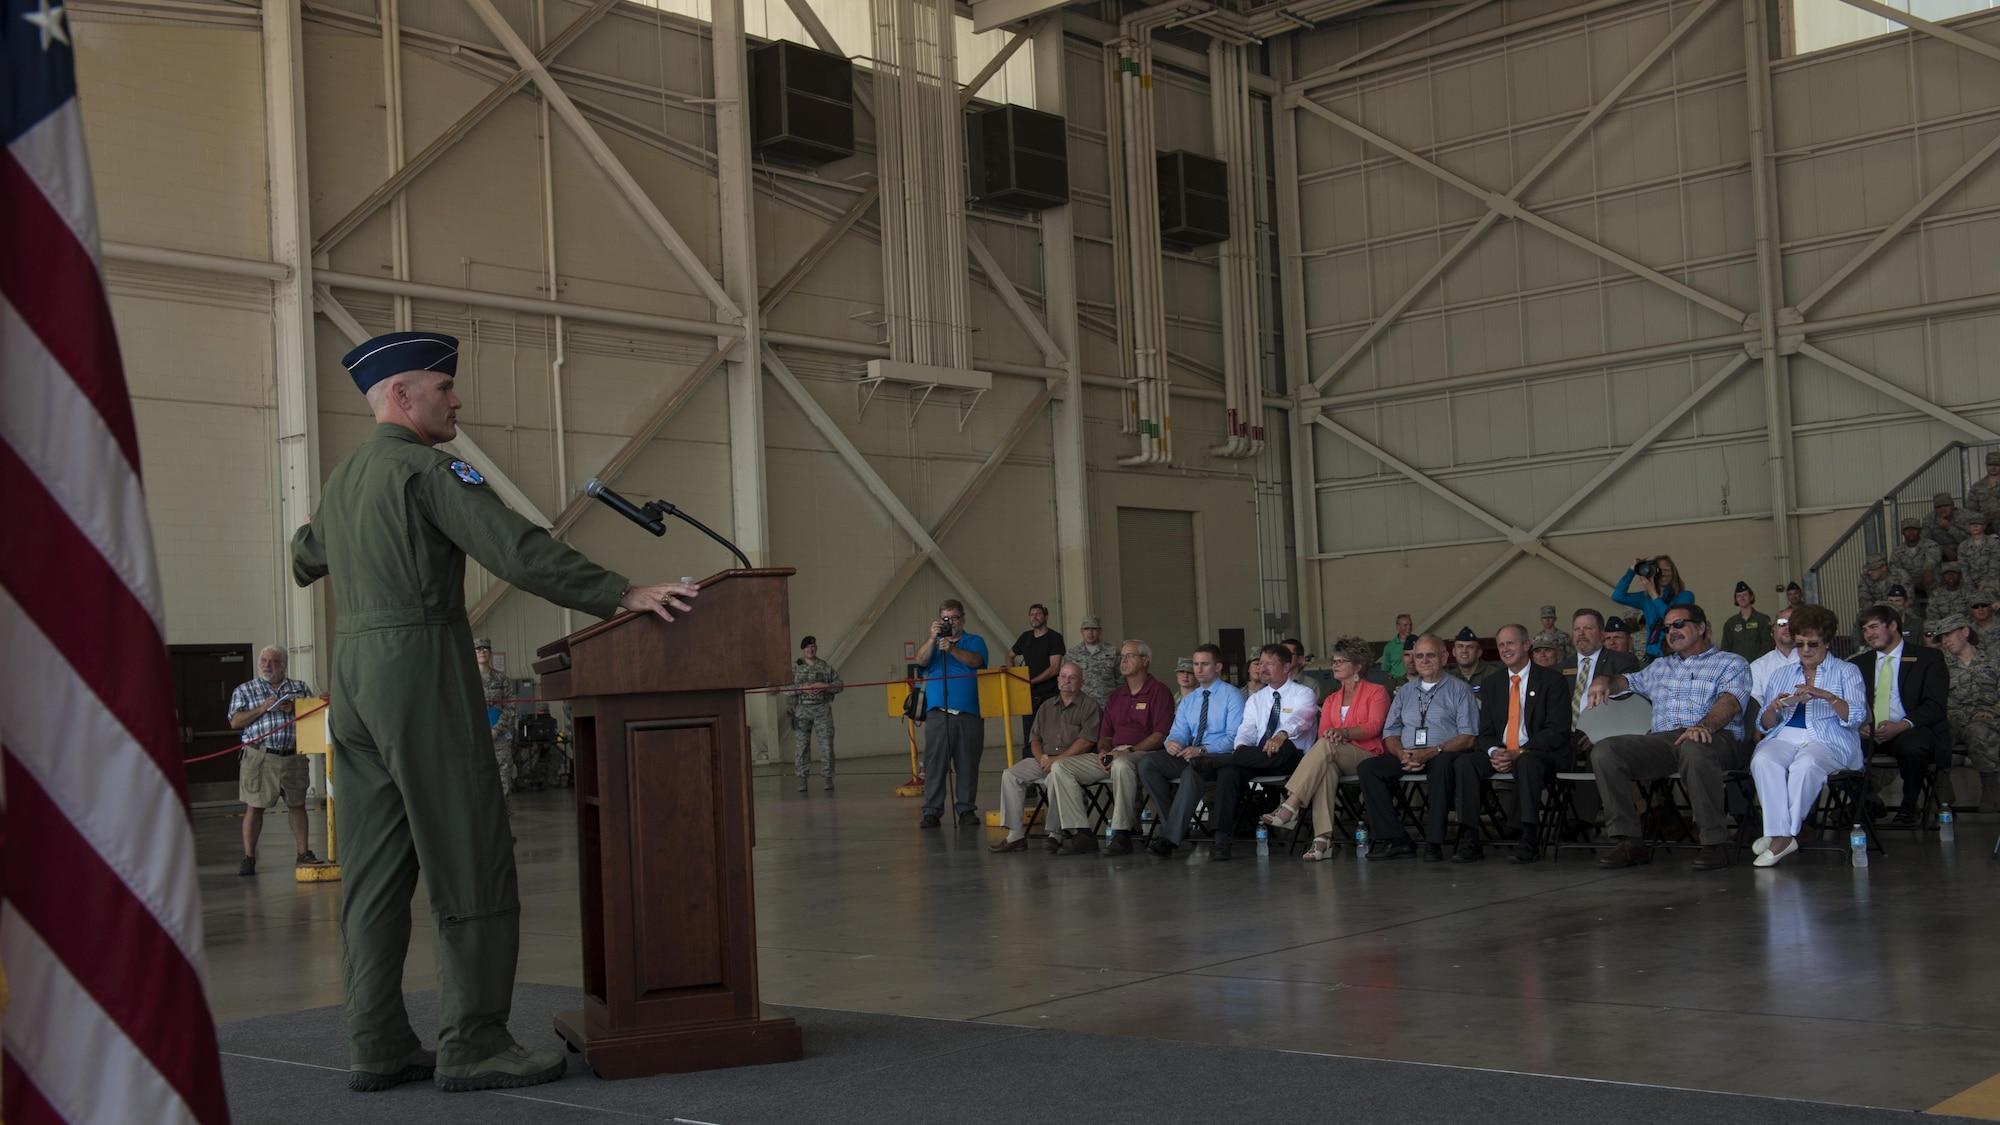 U.S. Air Force Gen. Carlton D. Everhart II, Air Mobility Command commander, speaks to Airmen from the 19th Airlift Wing during an aircraft delivery ceremony at Little Rock Air Force Base, Ark., June 20, 2016. Everhart delivered the last C-130J to the 19th Airlift Wing. (U.S. Air Force photo/Senior Airman Harry Brexel)